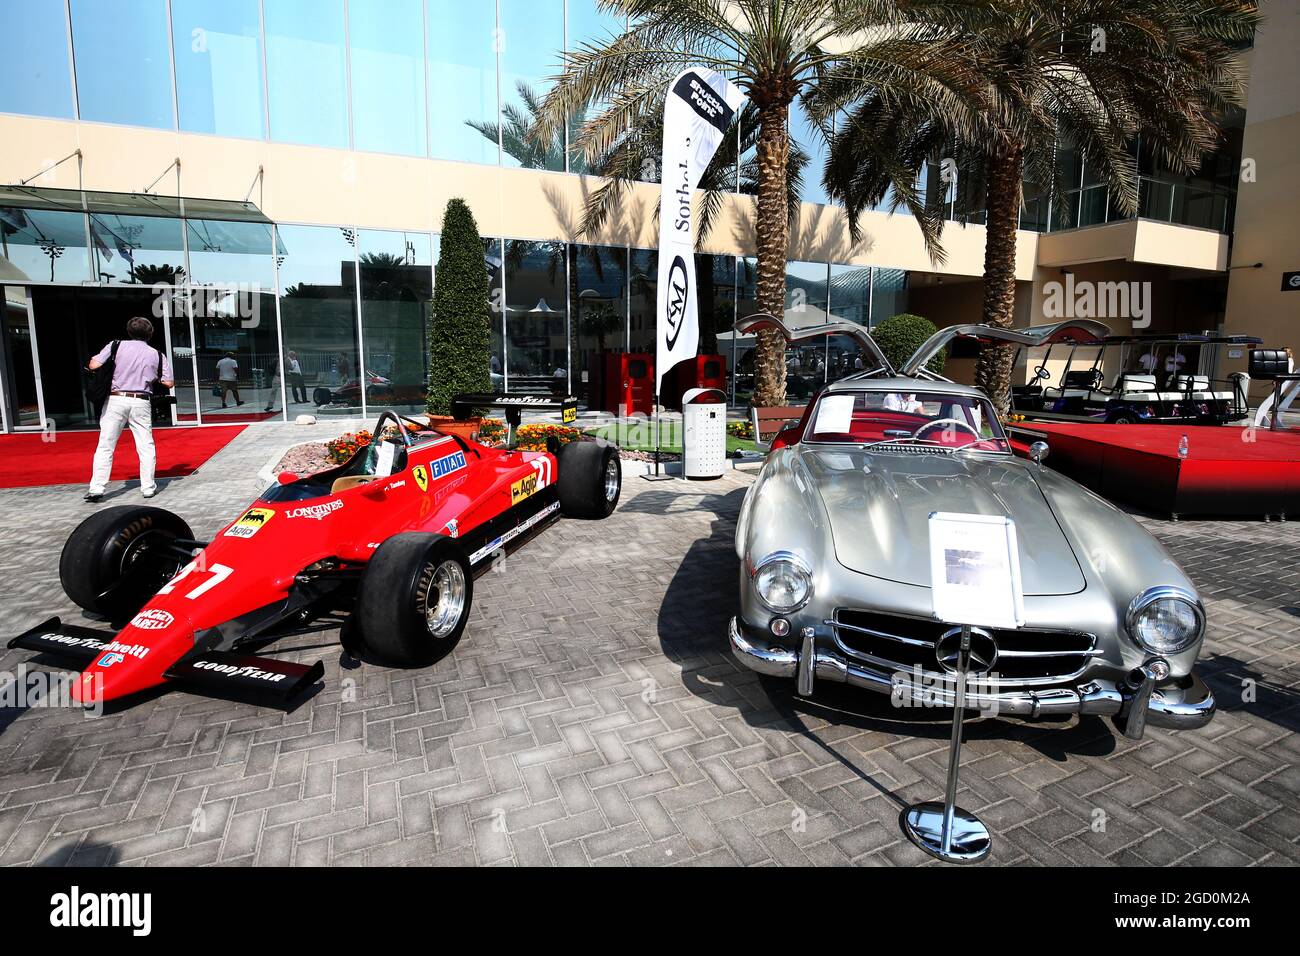 The 1982 Ferrari 126C2 driven by Patrick Tambay and a Mercedes-Benz 300 SL Gullwing on display in the paddock - Sotherby's. Abu Dhabi Grand Prix, Saturday 30th November 2019. Yas Marina Circuit, Abu Dhabi, UAE. Stock Photo